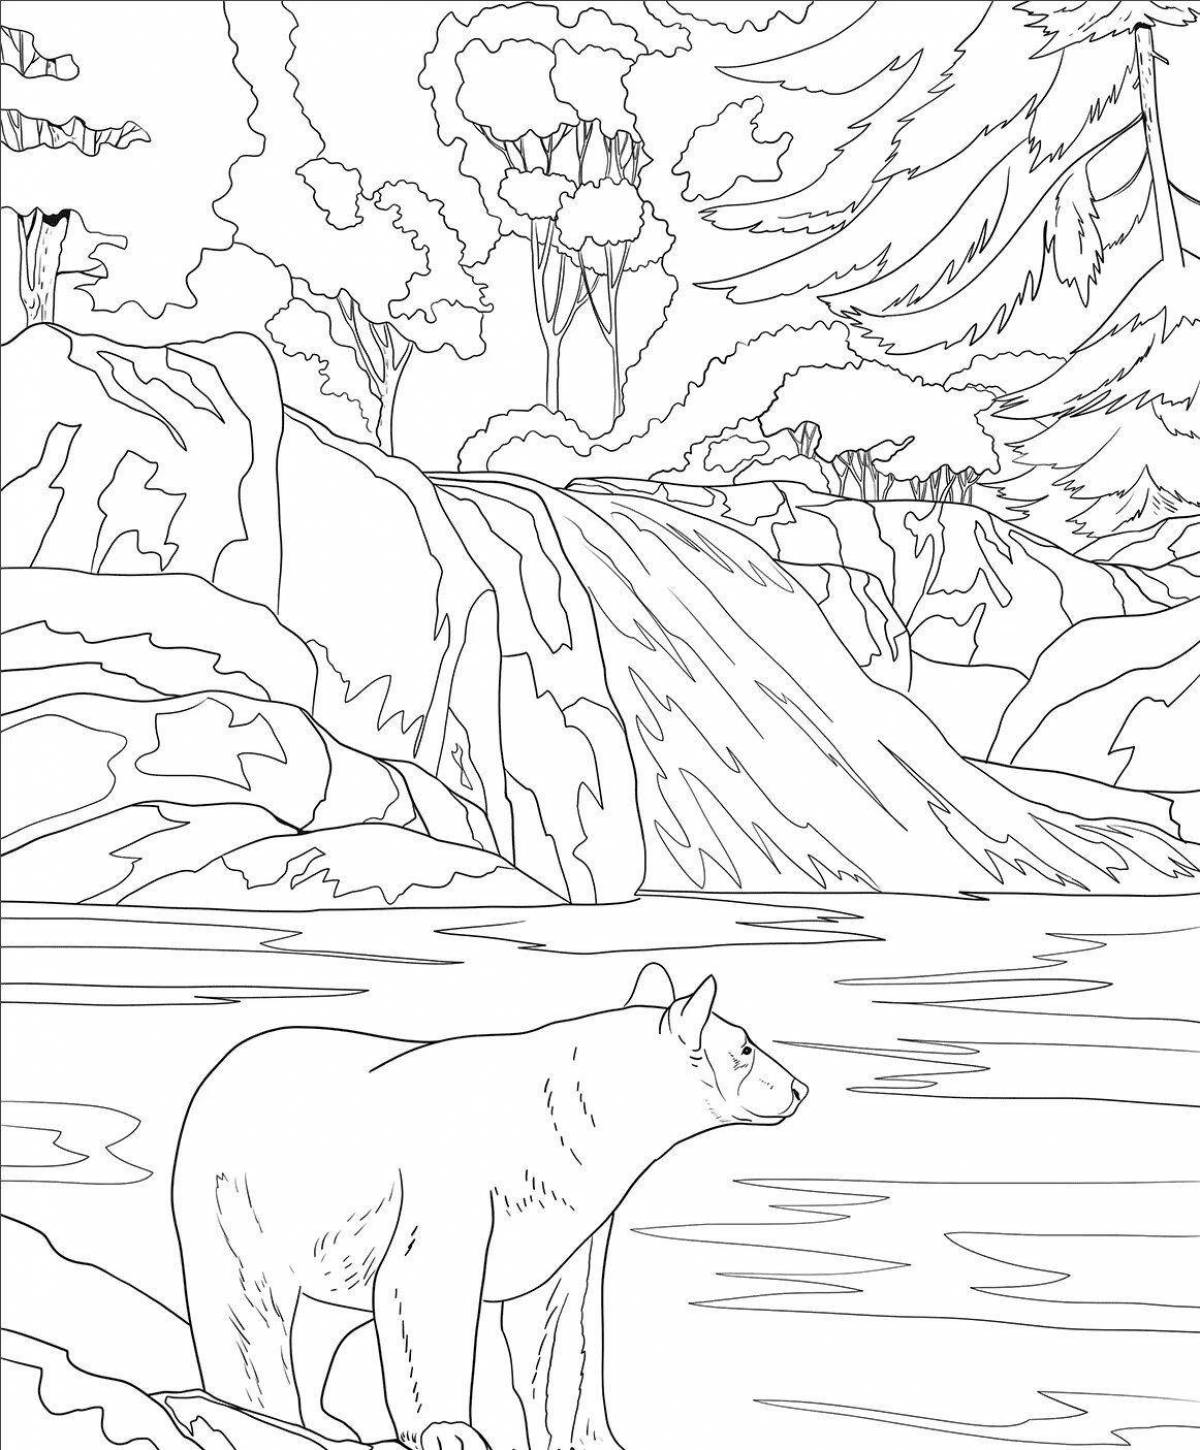 Merry taiga coloring book for kids